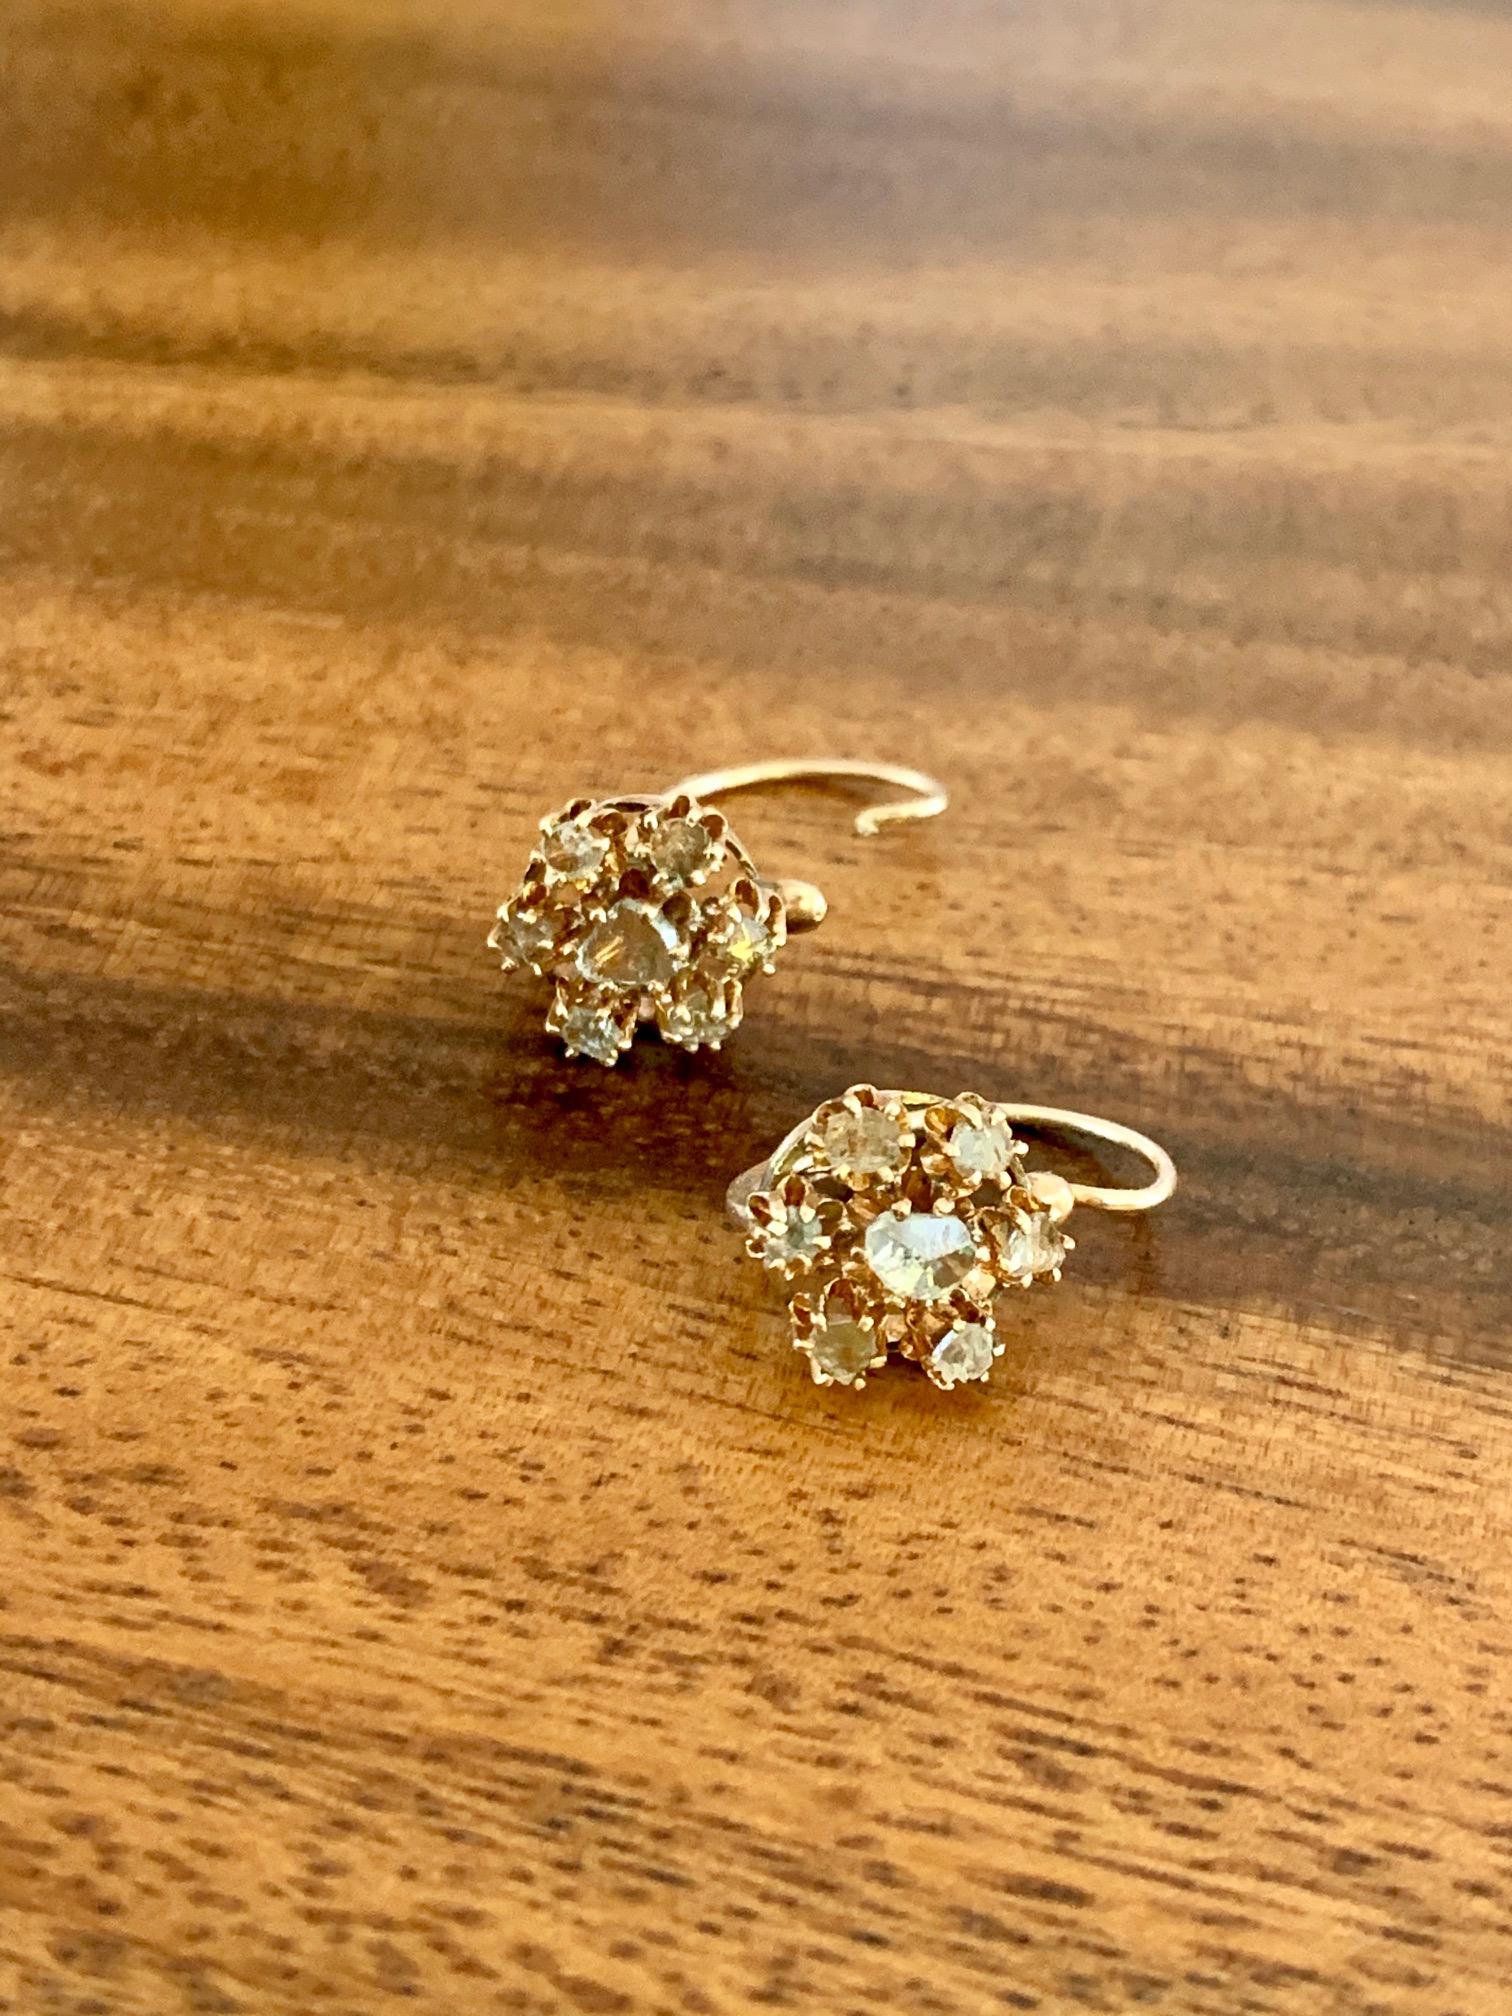 These 9 karat yellow Gold antique earrings feature seven rose cut Diamonds on each earring.  The center stone is slightly larger than the six stones surrounding it.  They feature a front closure.

Weight: 2.4 grams
Cluster size: 3/4